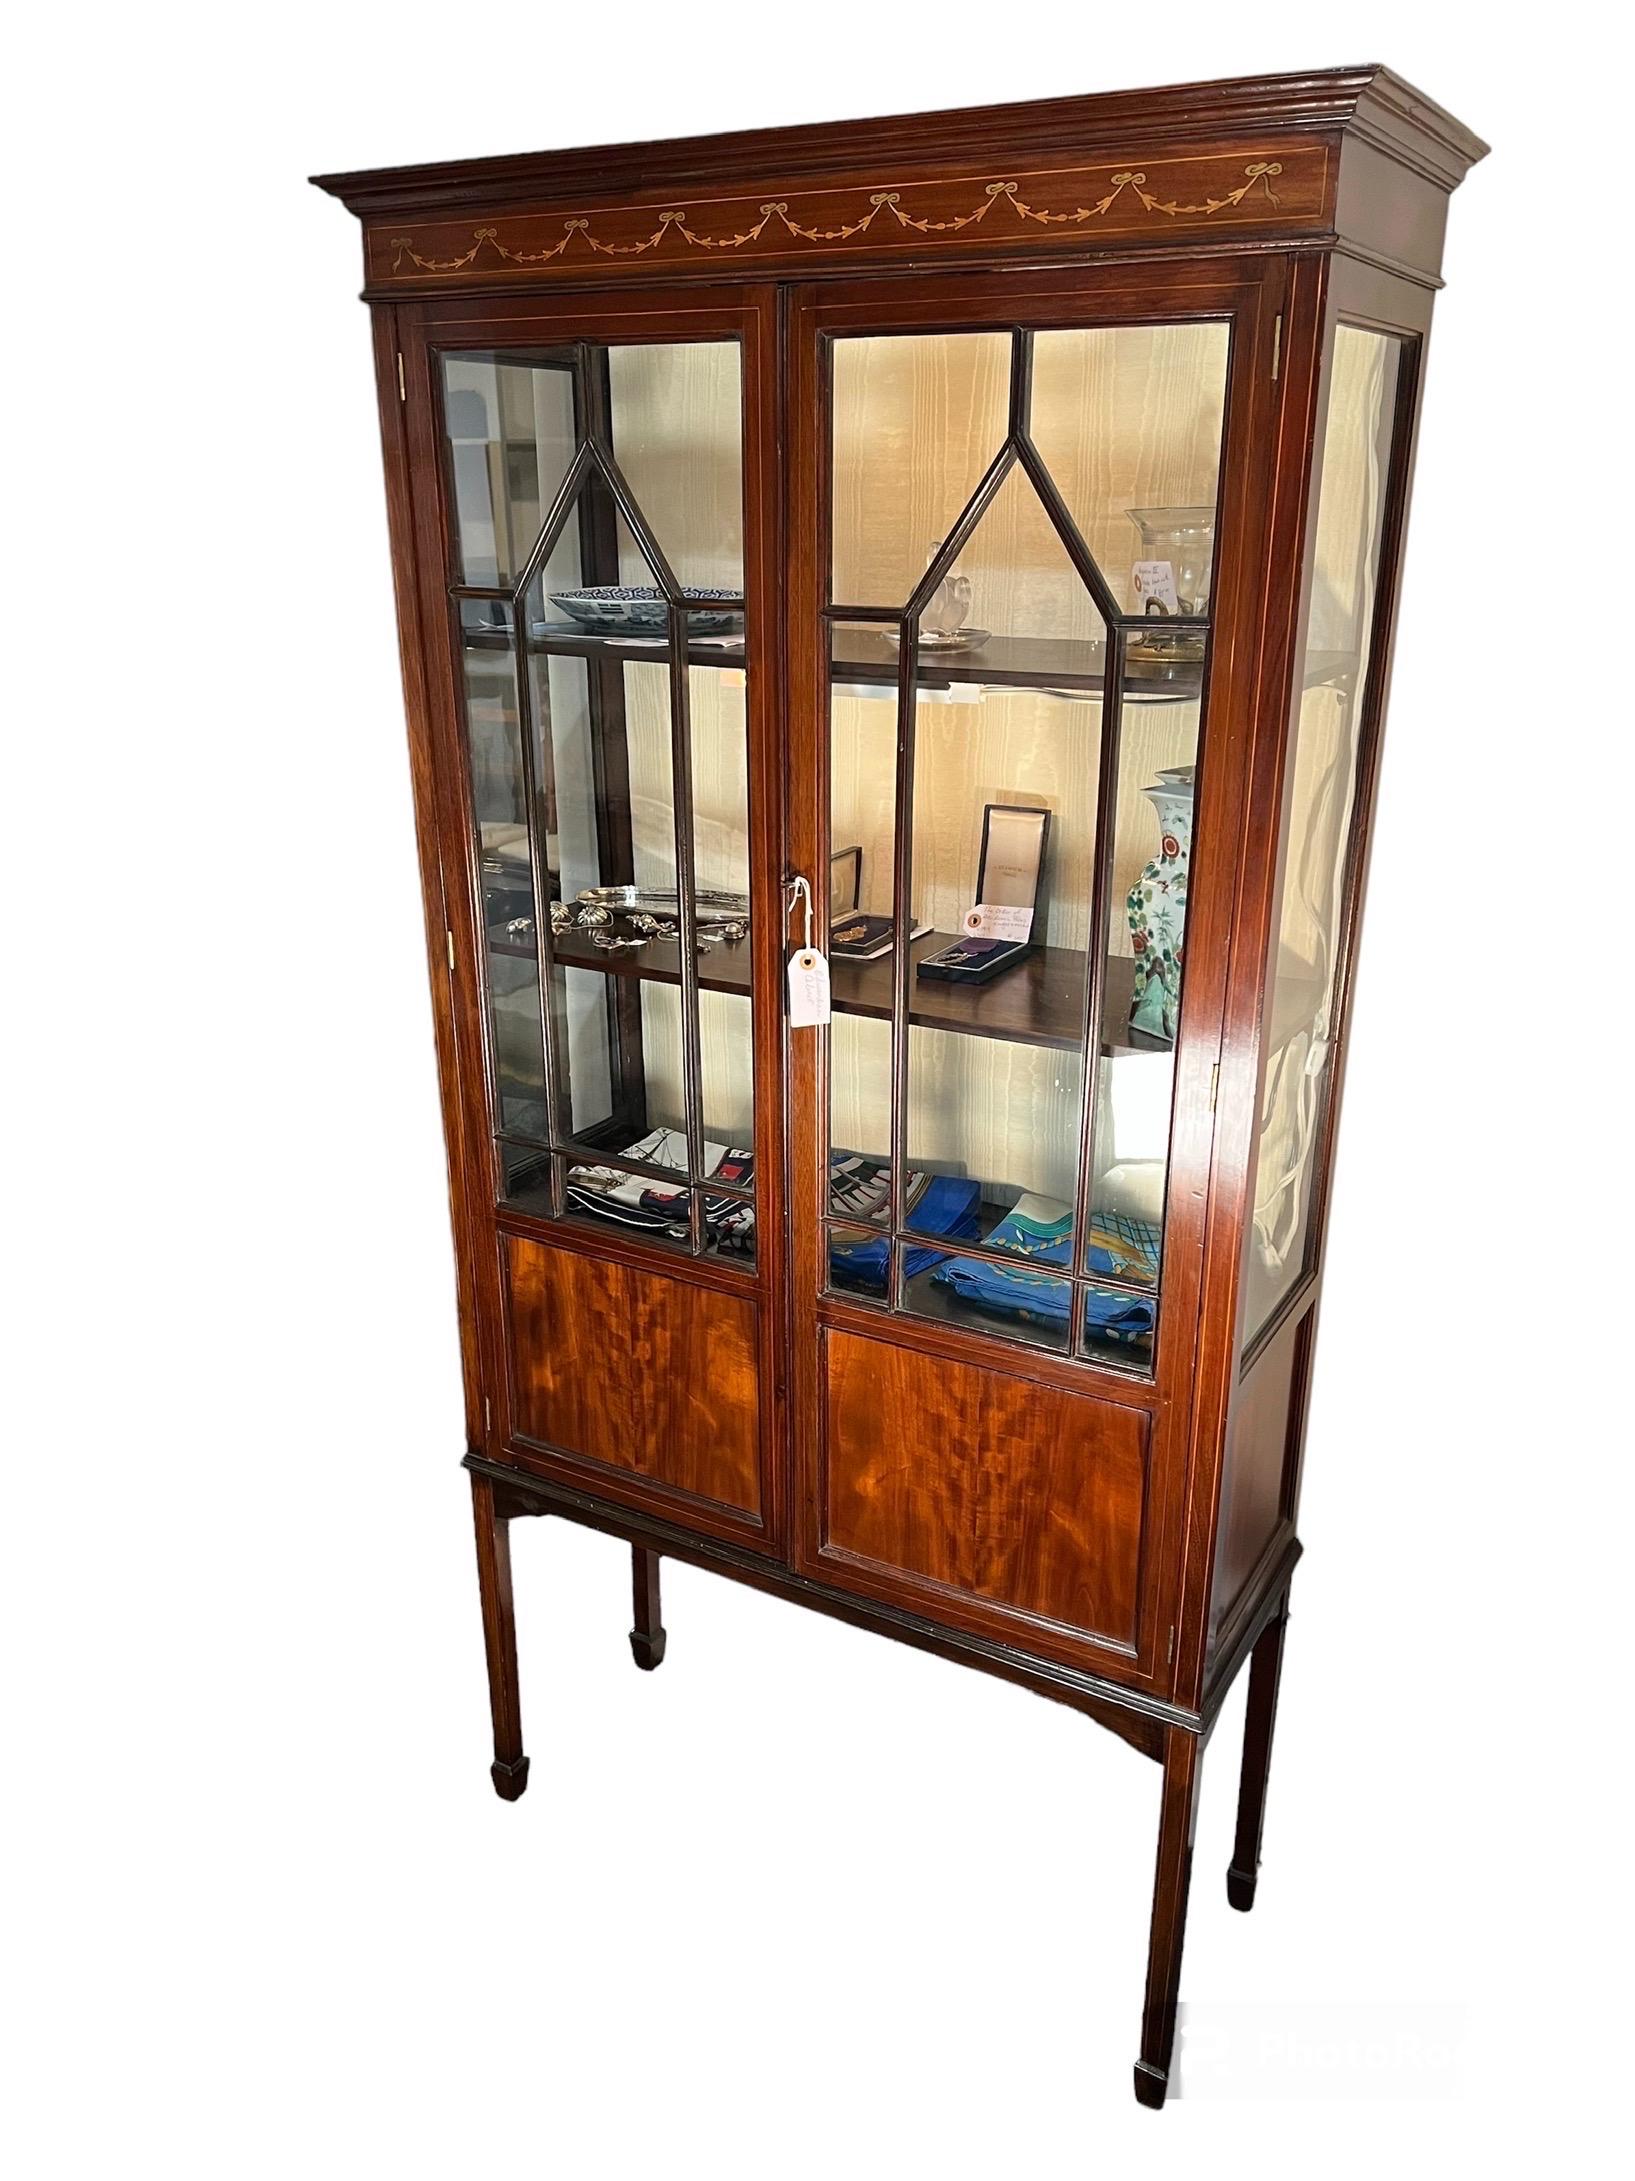 Edwardian Mahogany Cabinet with Inlaid panel at 
cresting over 2 glassed doors revealing 2 shelves,
over 2 panels concealing a lower shelf. With 1 key.